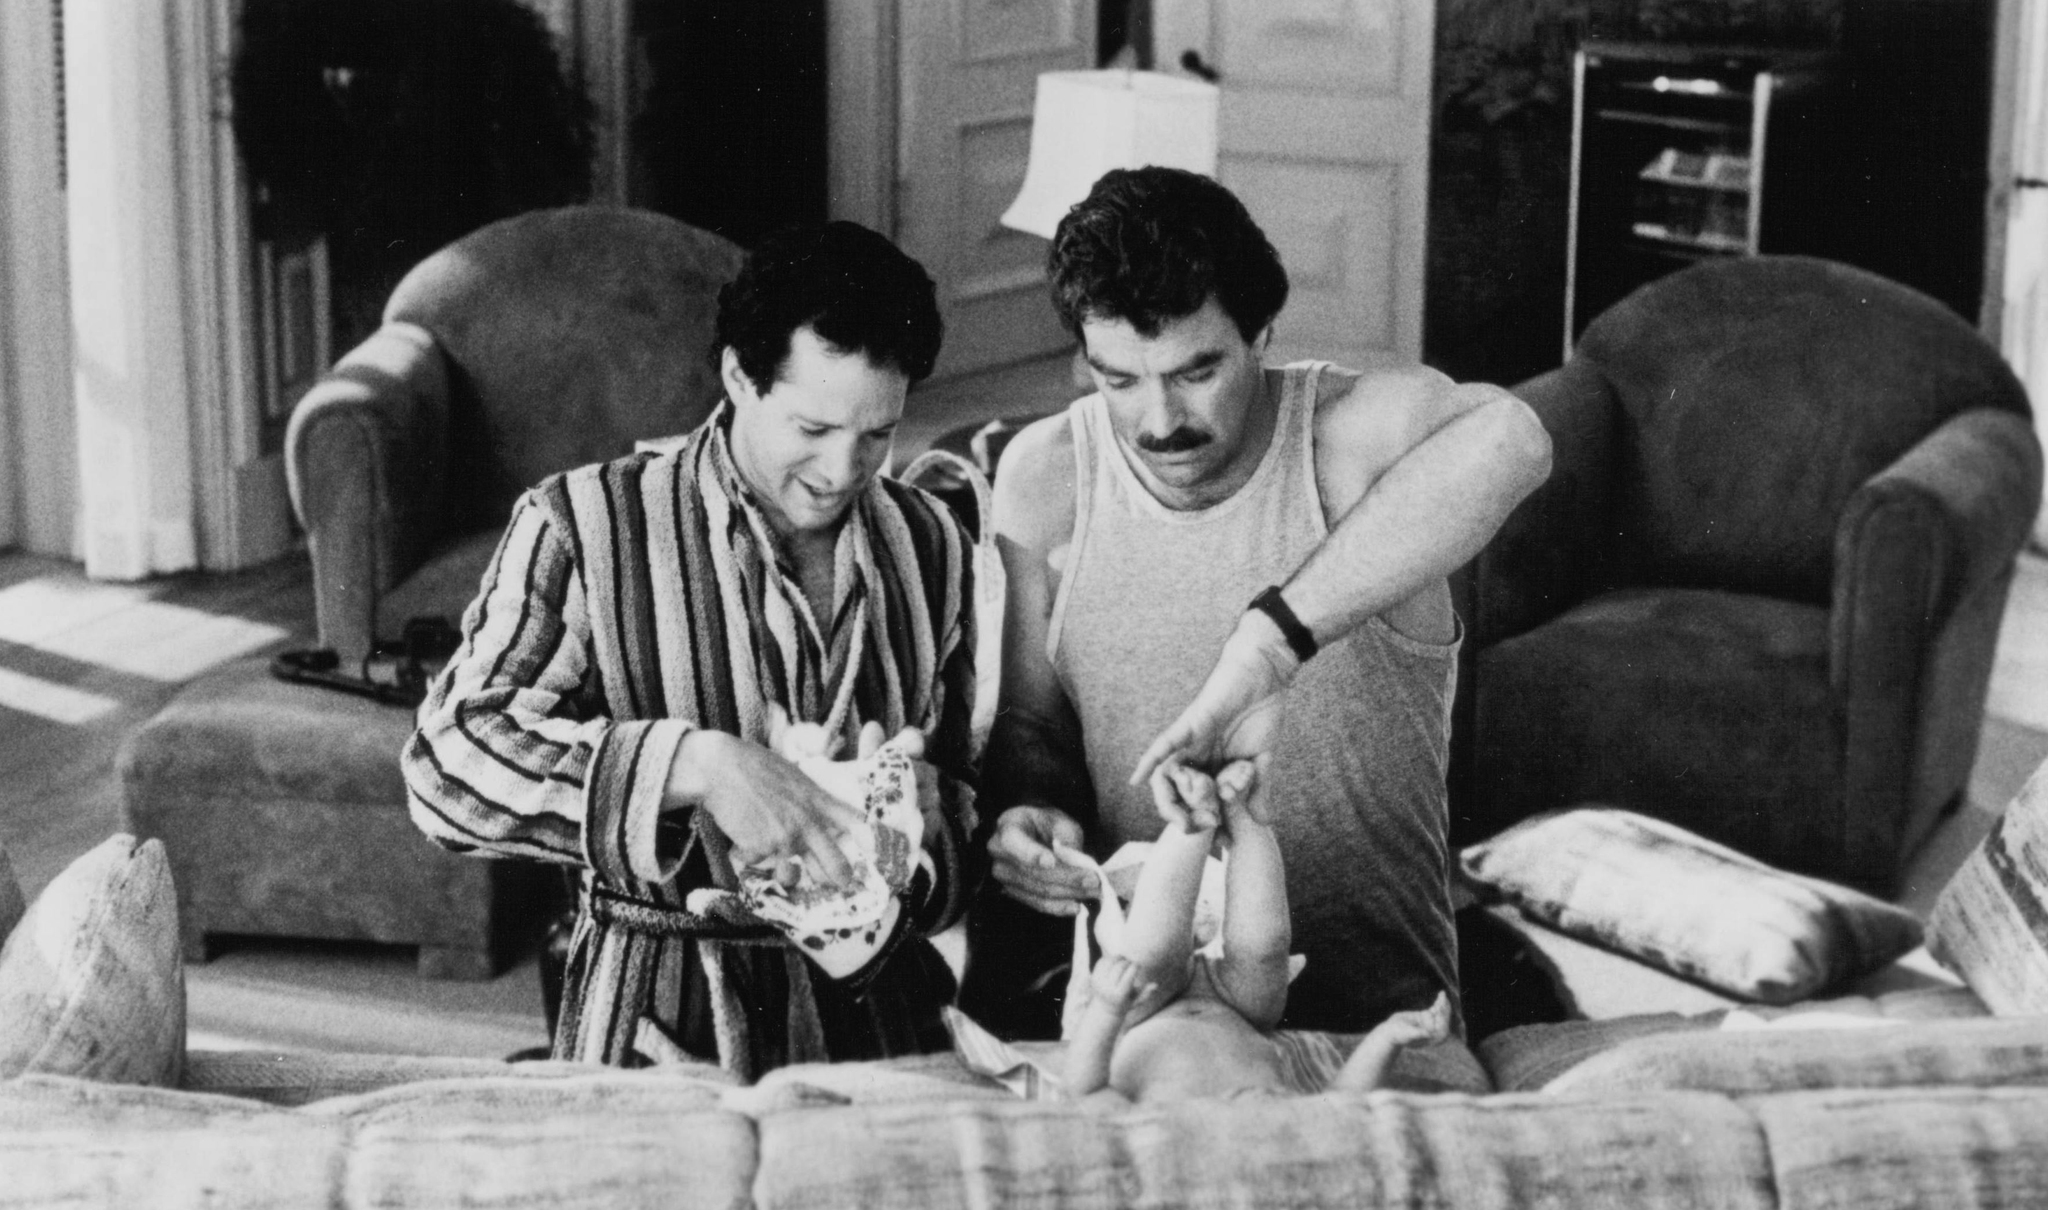 Still of Steve Guttenberg and Tom Selleck in 3 Men and a Baby (1987)